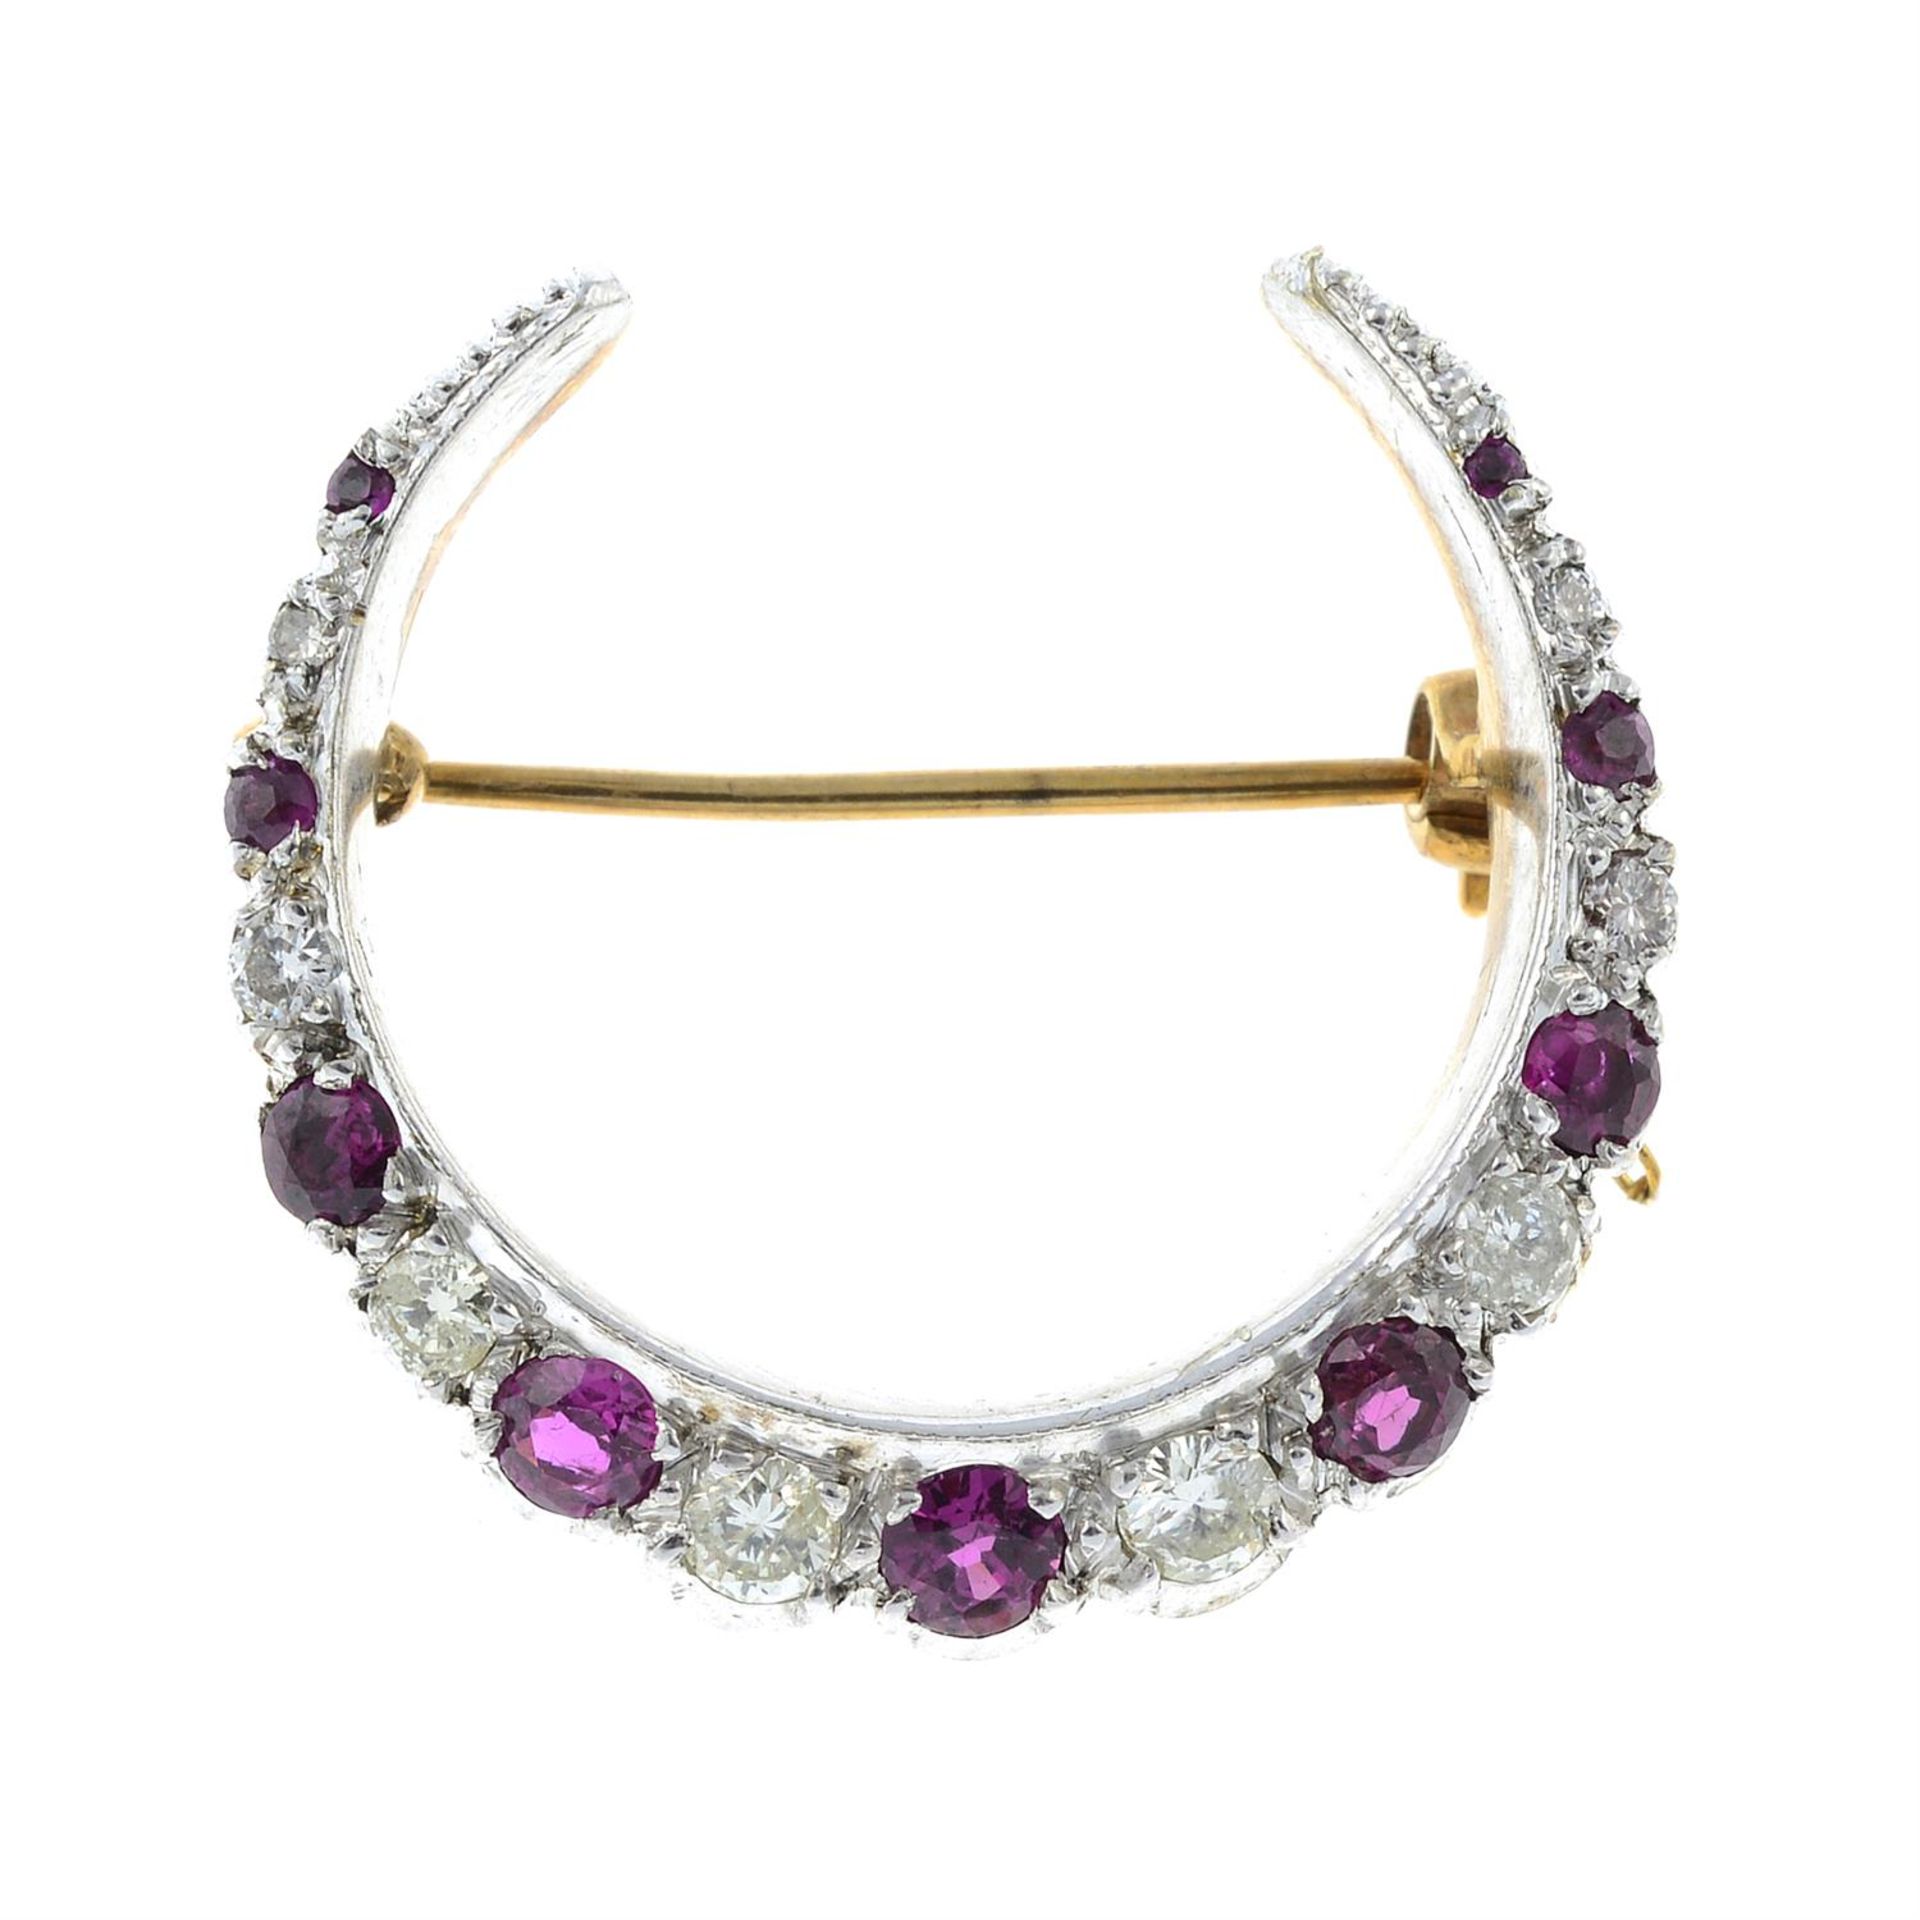 A 9ct gold ruby and diamond crescent brooch.